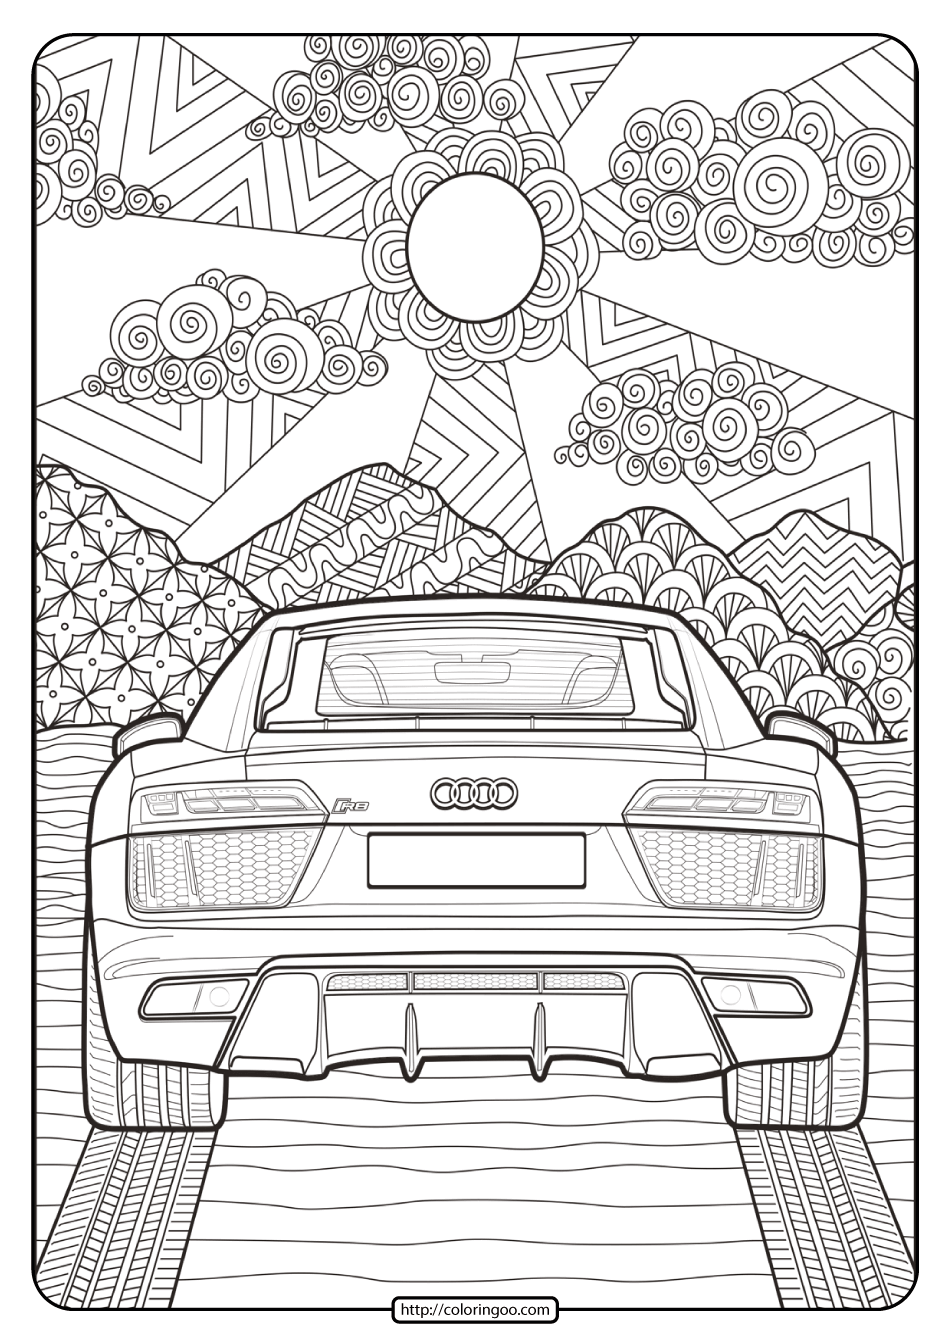 Printable Audi Cars Coloring Book & Page – 13